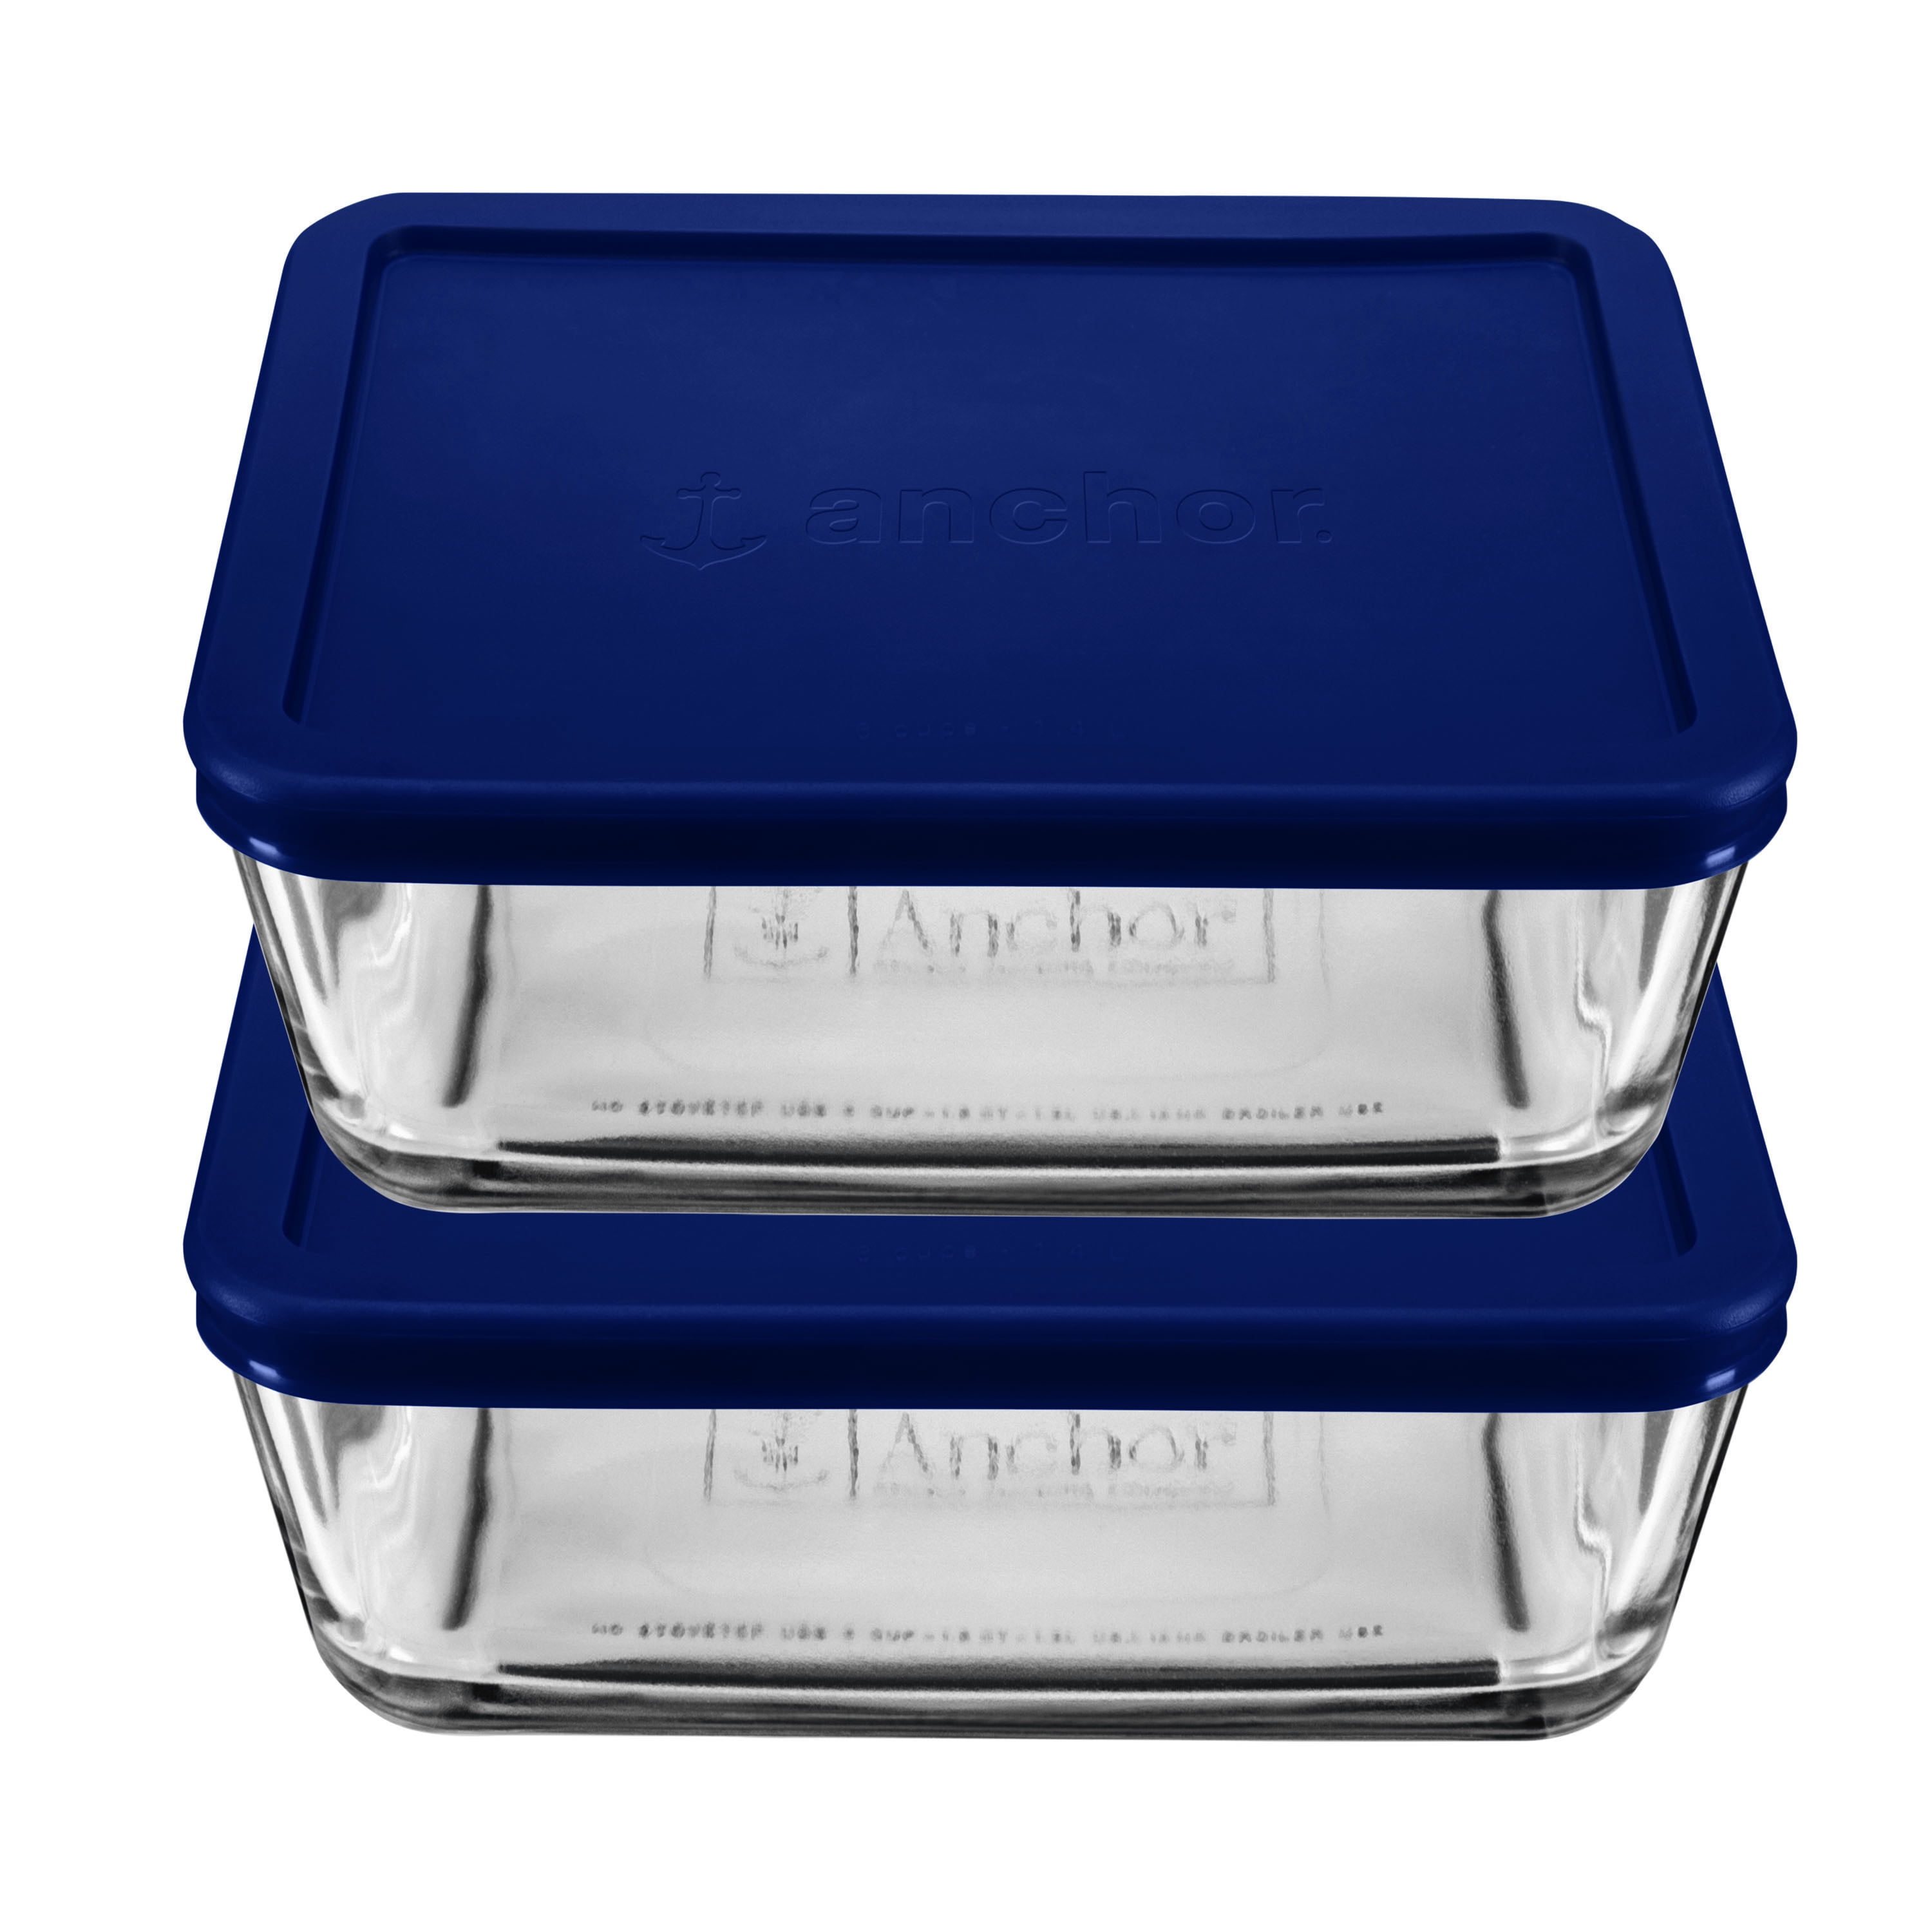 Anchor Hocking Glass Food Storage Containers with Lids, 3 Cup Rectangular,  Set of 2